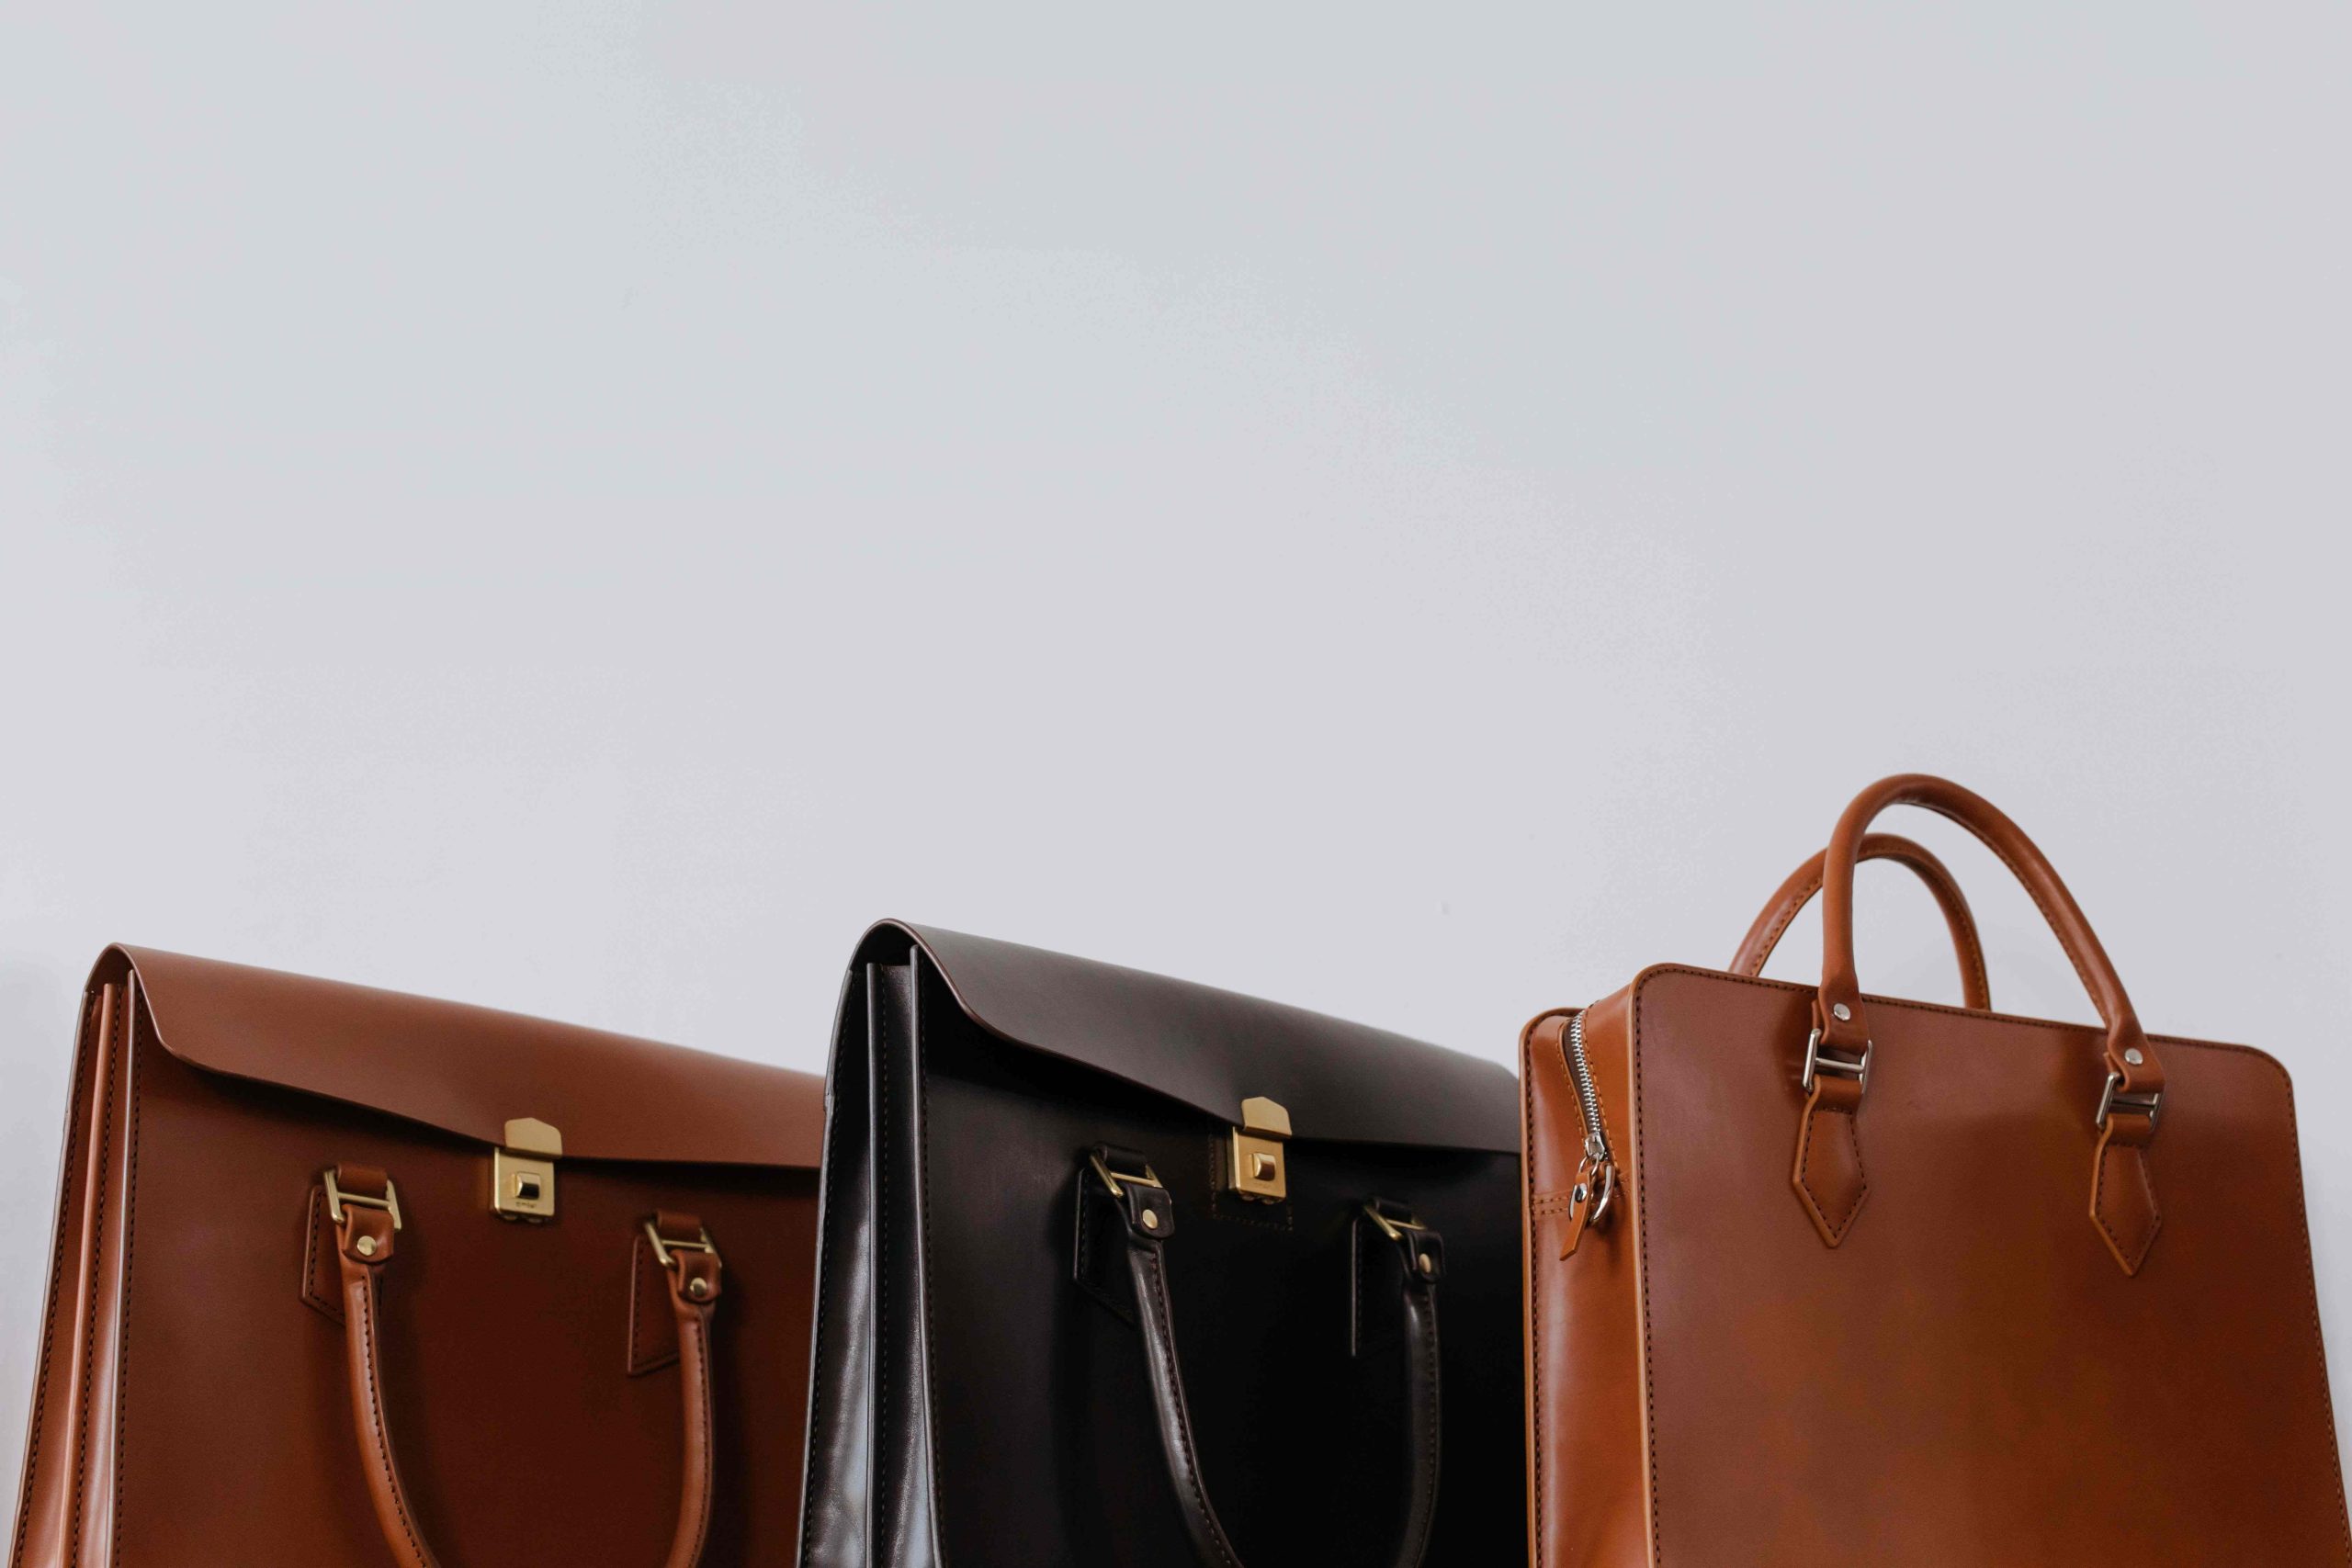 Which Is the Best Way to Buy Luxury Luggage Bags? - News Plana